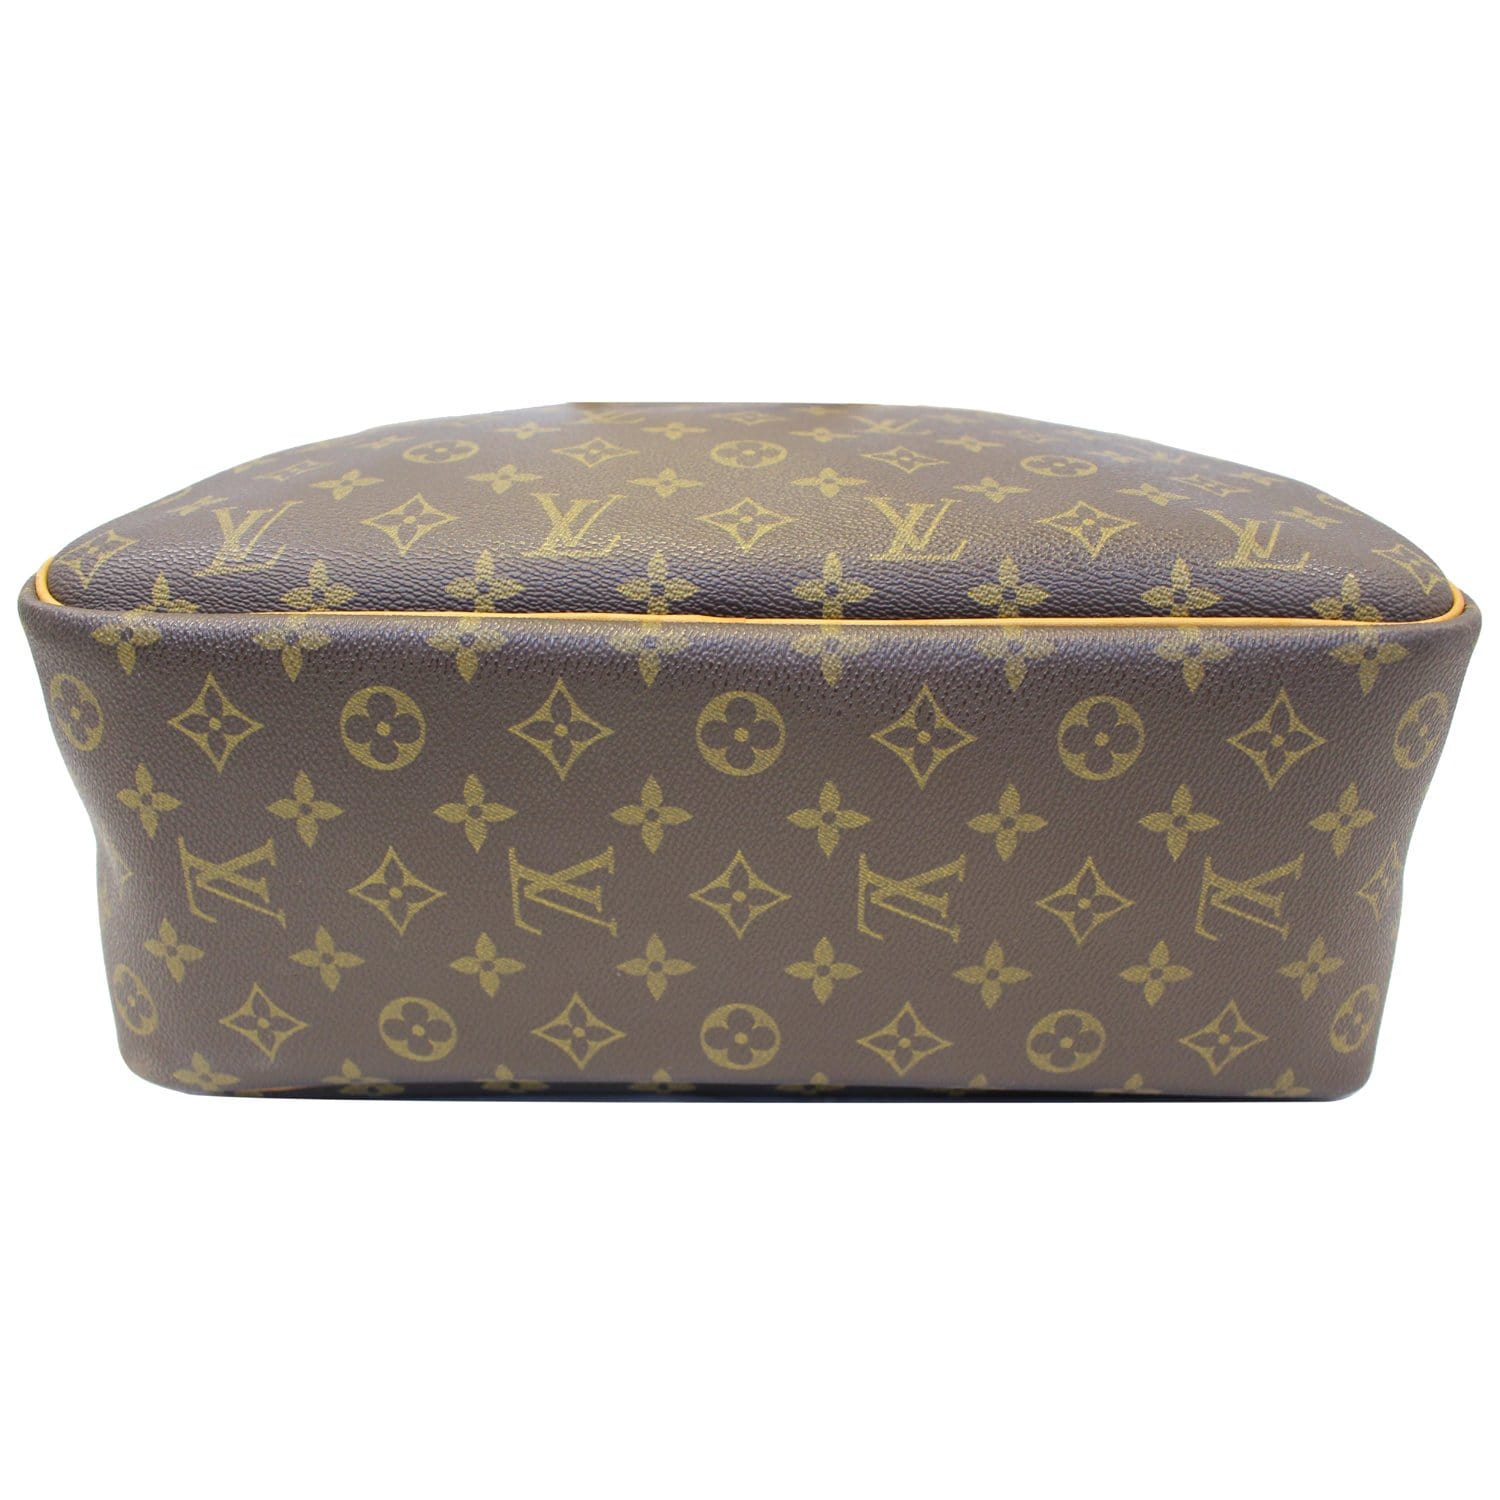 Deauville monogram gm size Available - Luxury branded name